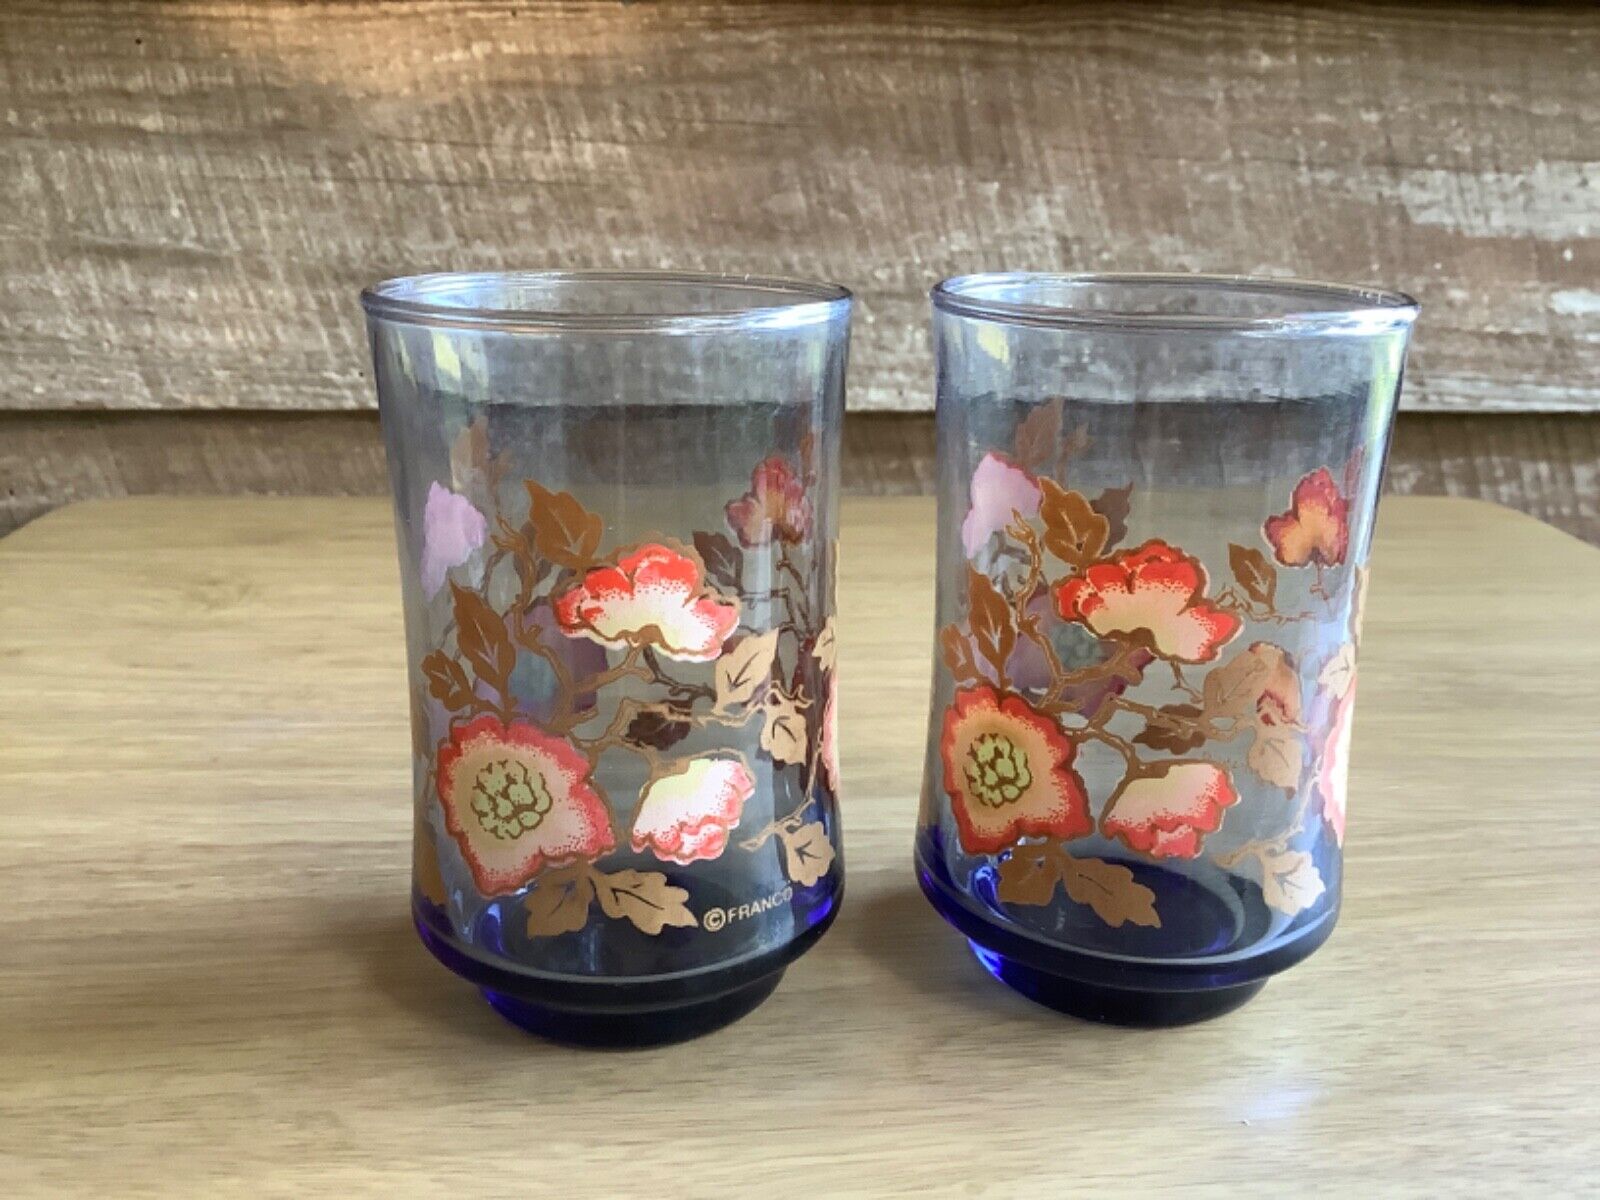 Vintage Libbey Juice Glasses 2 Franco Coral Poppies Blue Fade Cottagecore Shabby